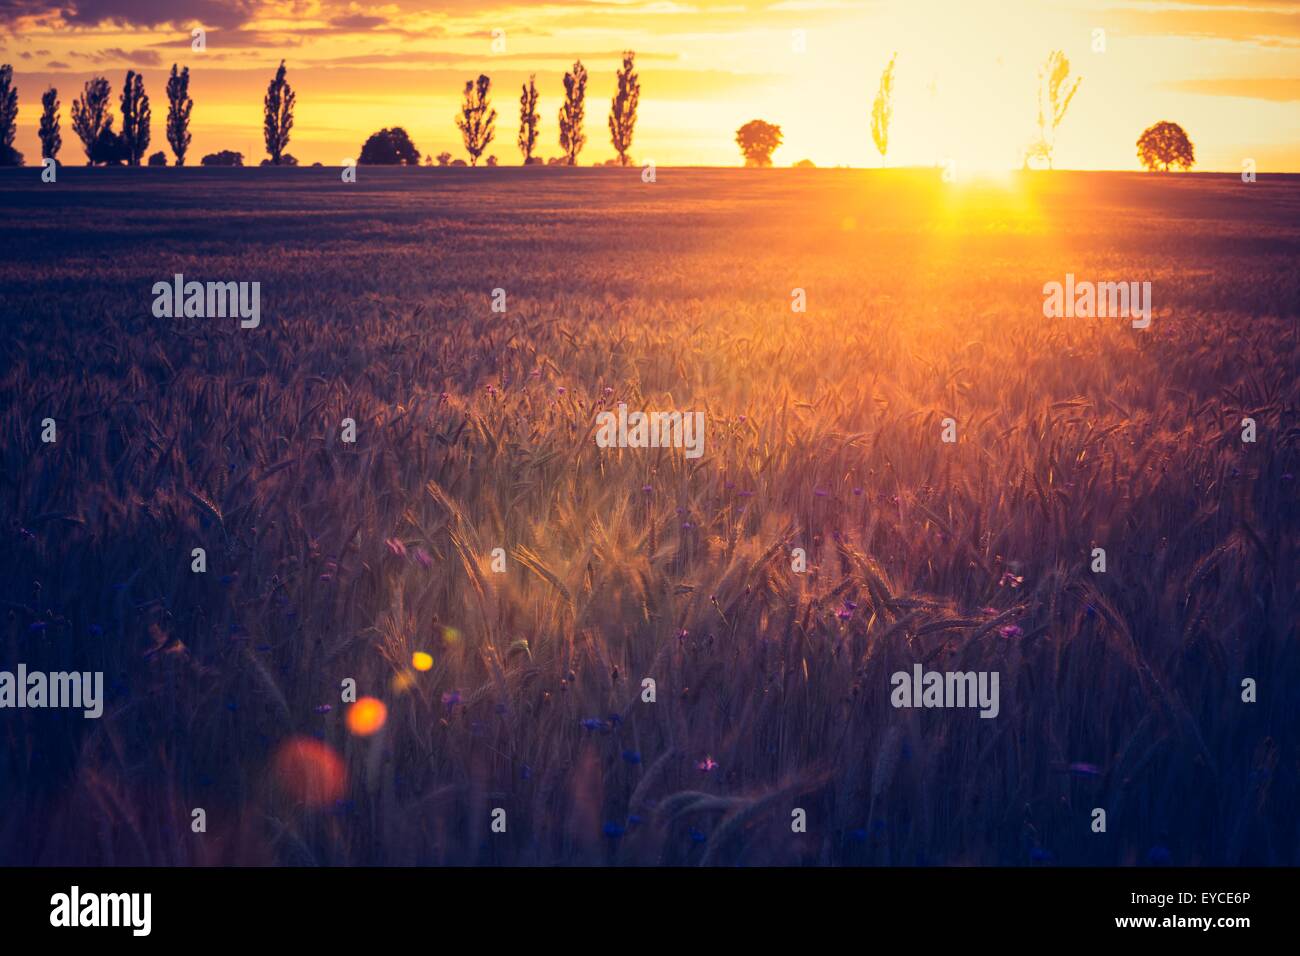 Vintage photo of sunset over corn field at summer. Beautiful grown corn ears in summertime field at sunset. Stock Photo